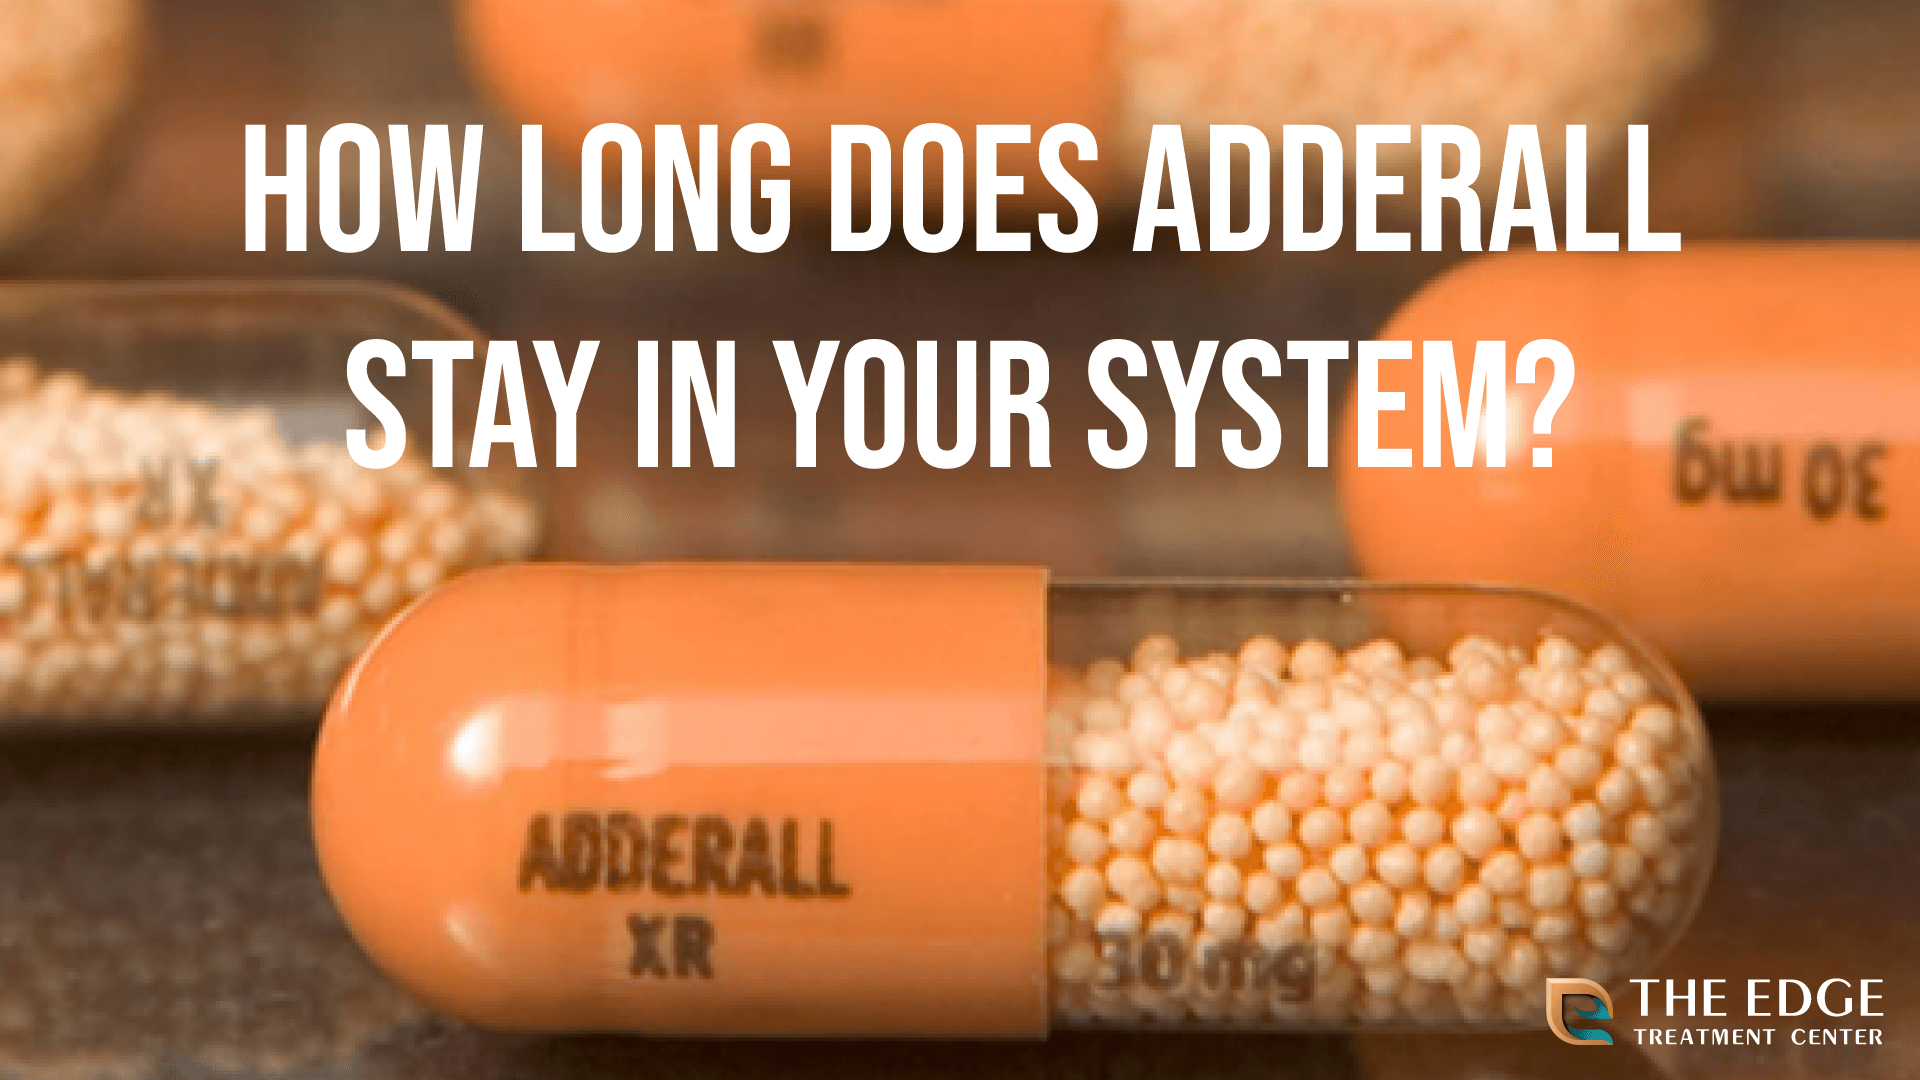 Adderall Vs Modafinil: Pros And Cons